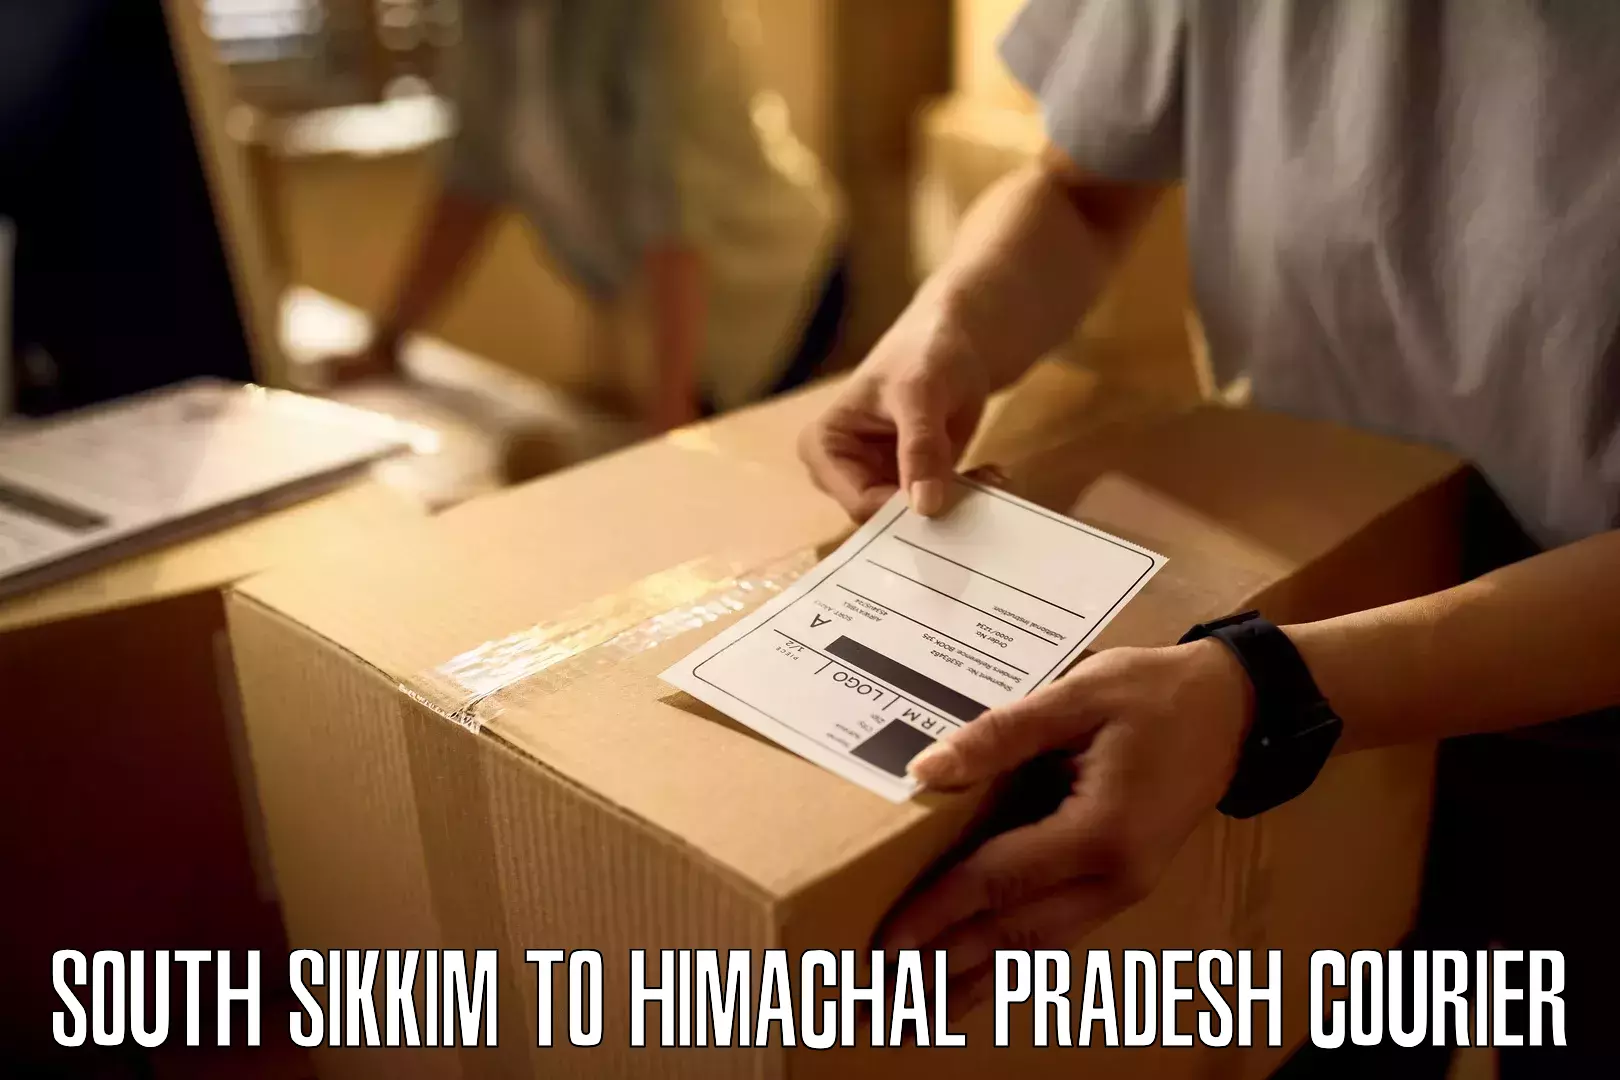 Courier insurance South Sikkim to Amb Una